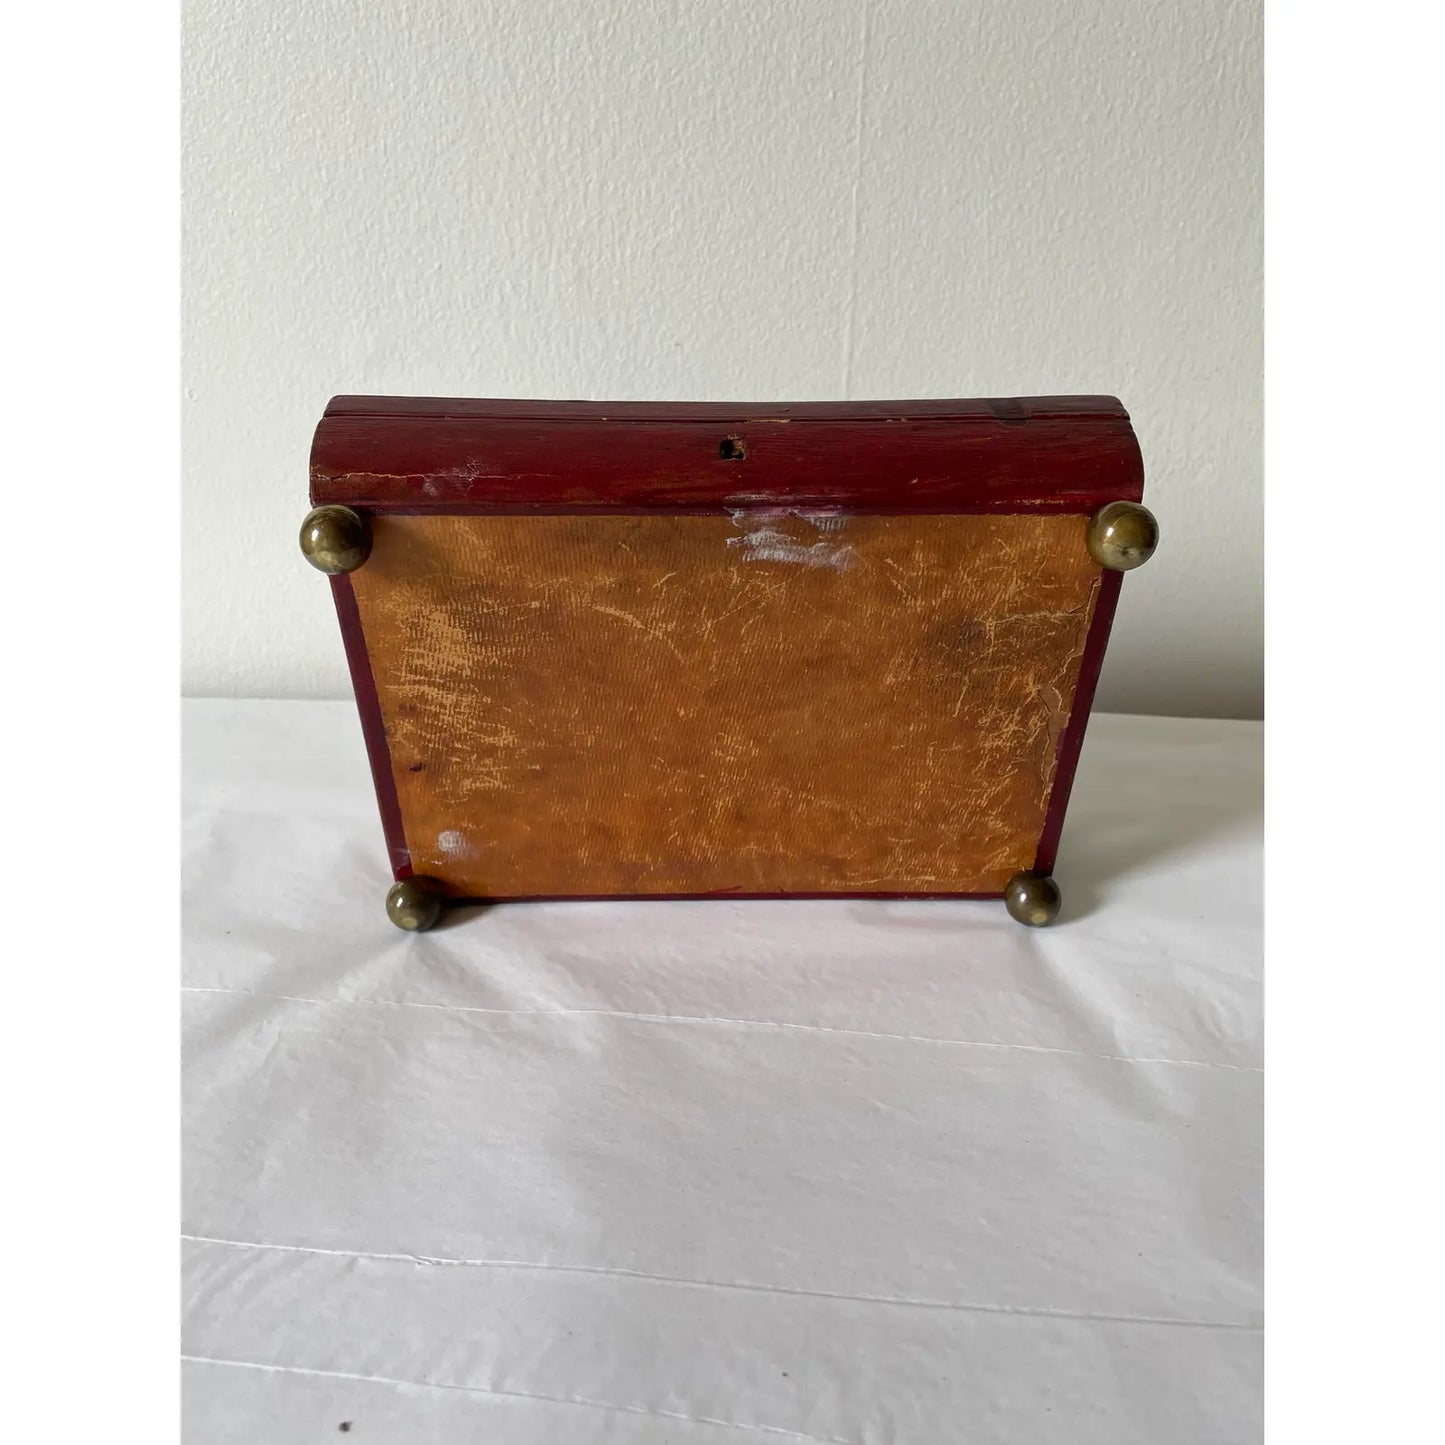 Antique Regency Red Leather Sewing Box